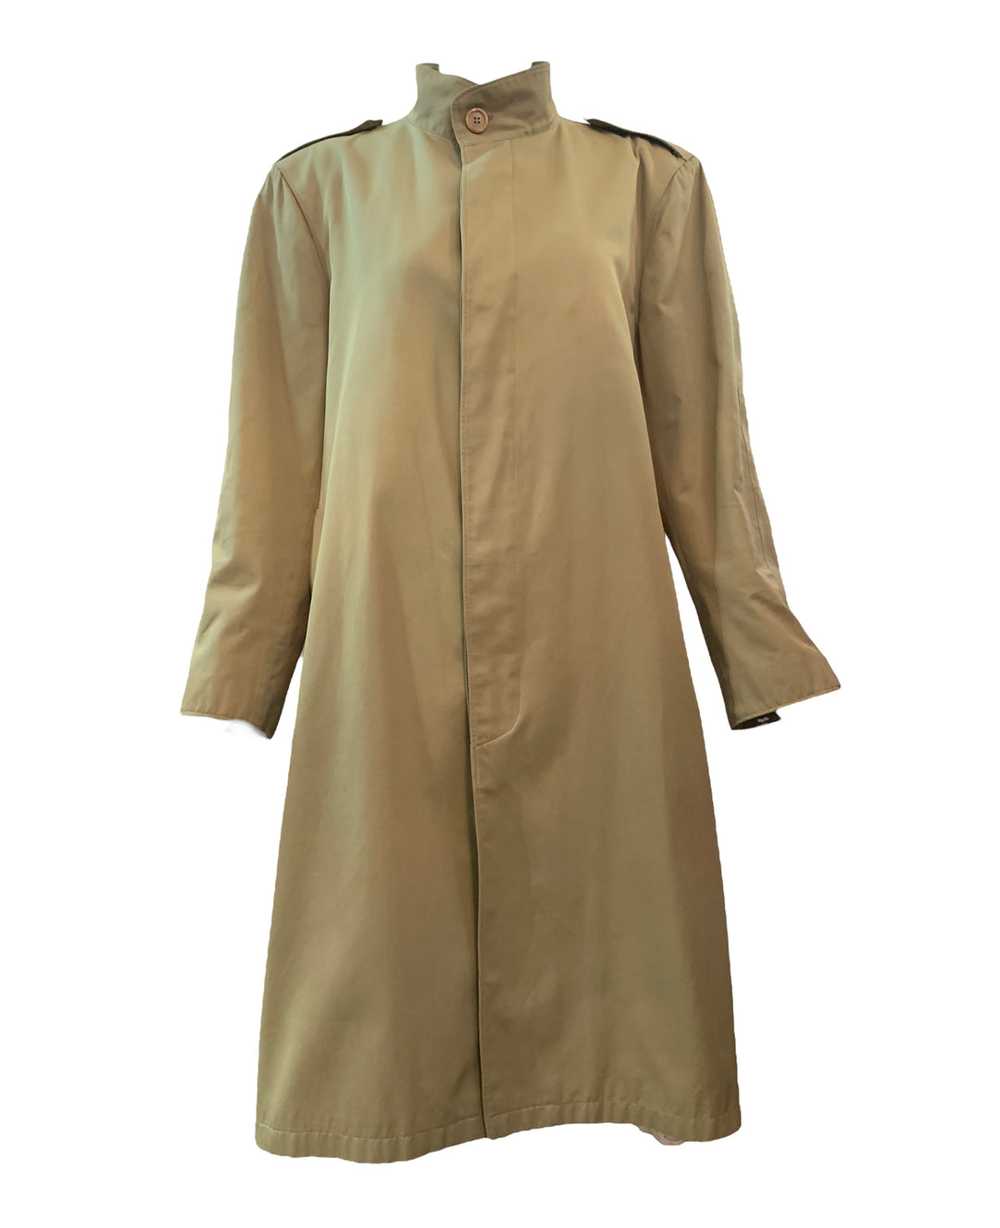 Gucci 80s Belted Trench Coat With Logo Buttons - image 1